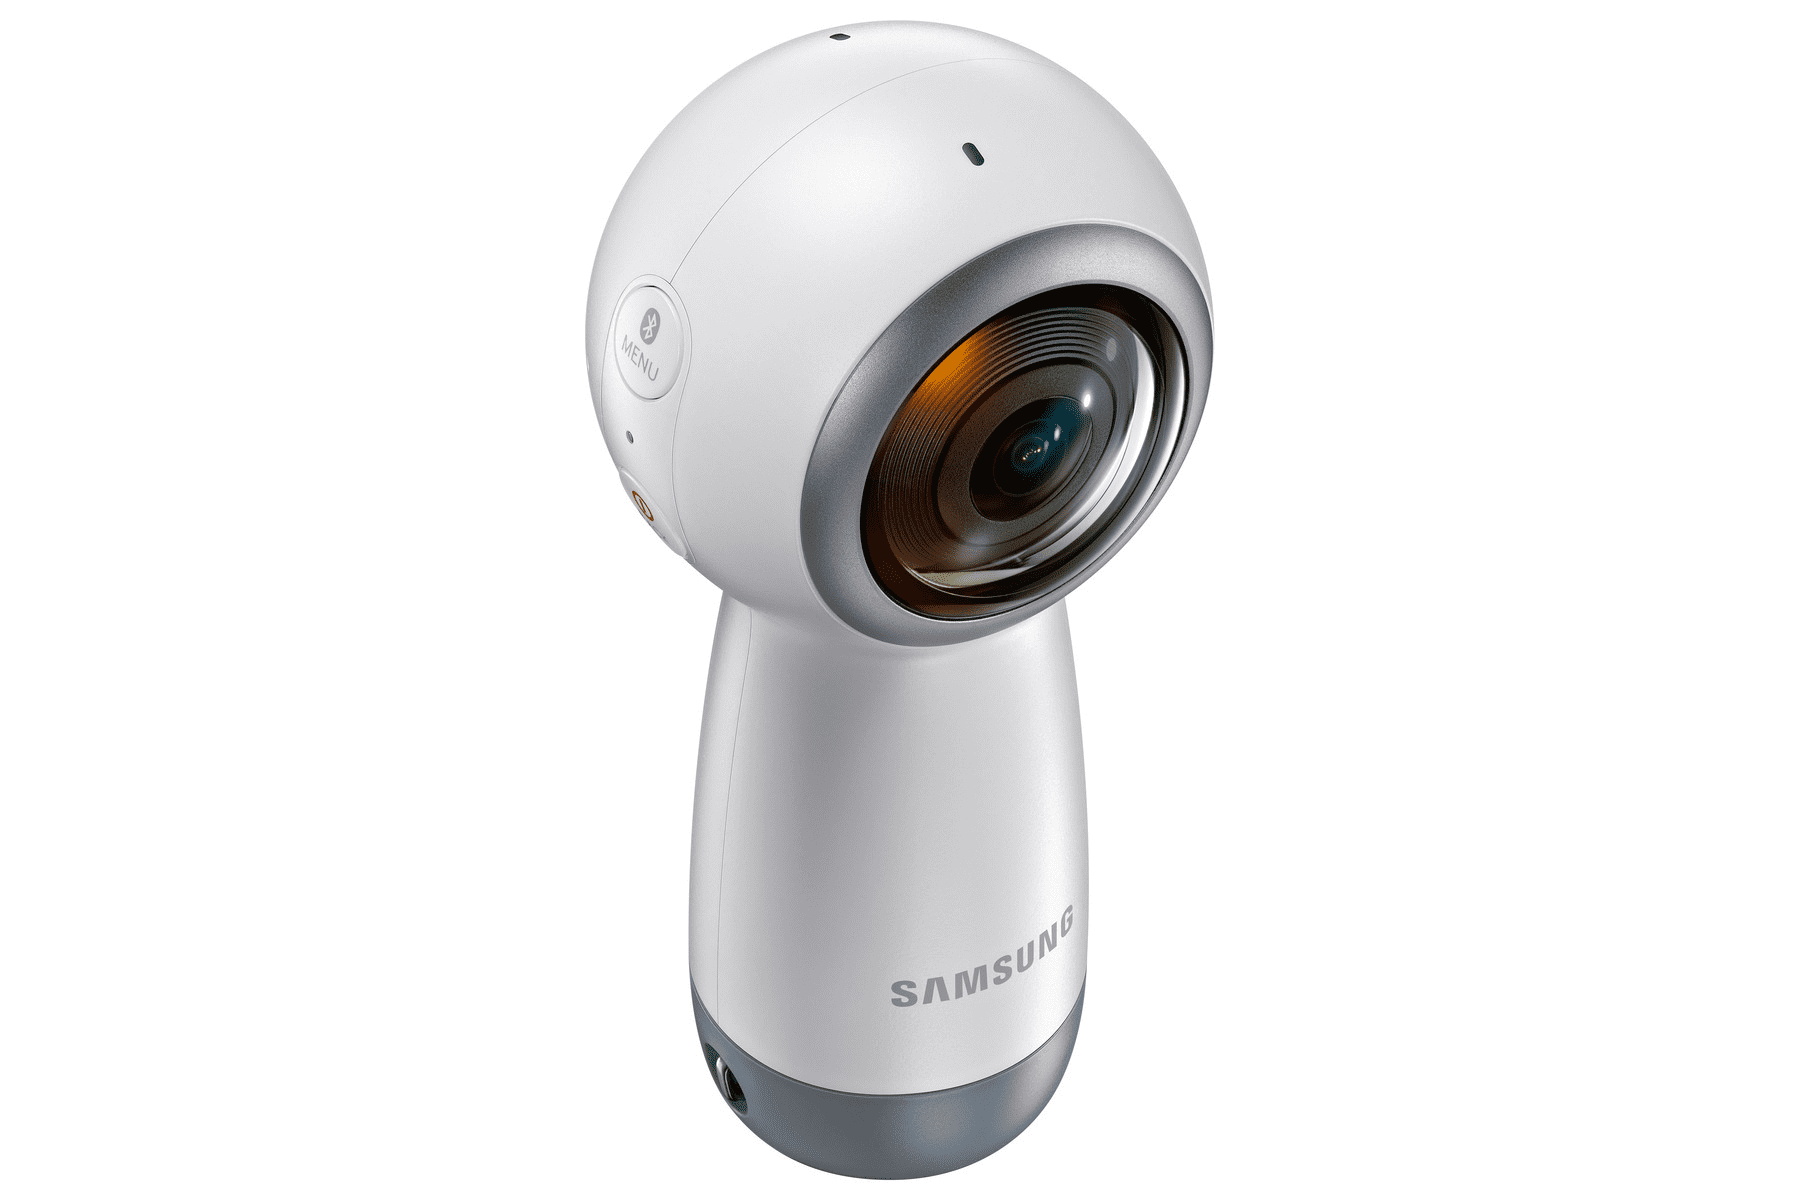  Samsung Gear 360 Real 360° High Resolution VR Camera (US  Version with Warranty) : Cell Phones & Accessories